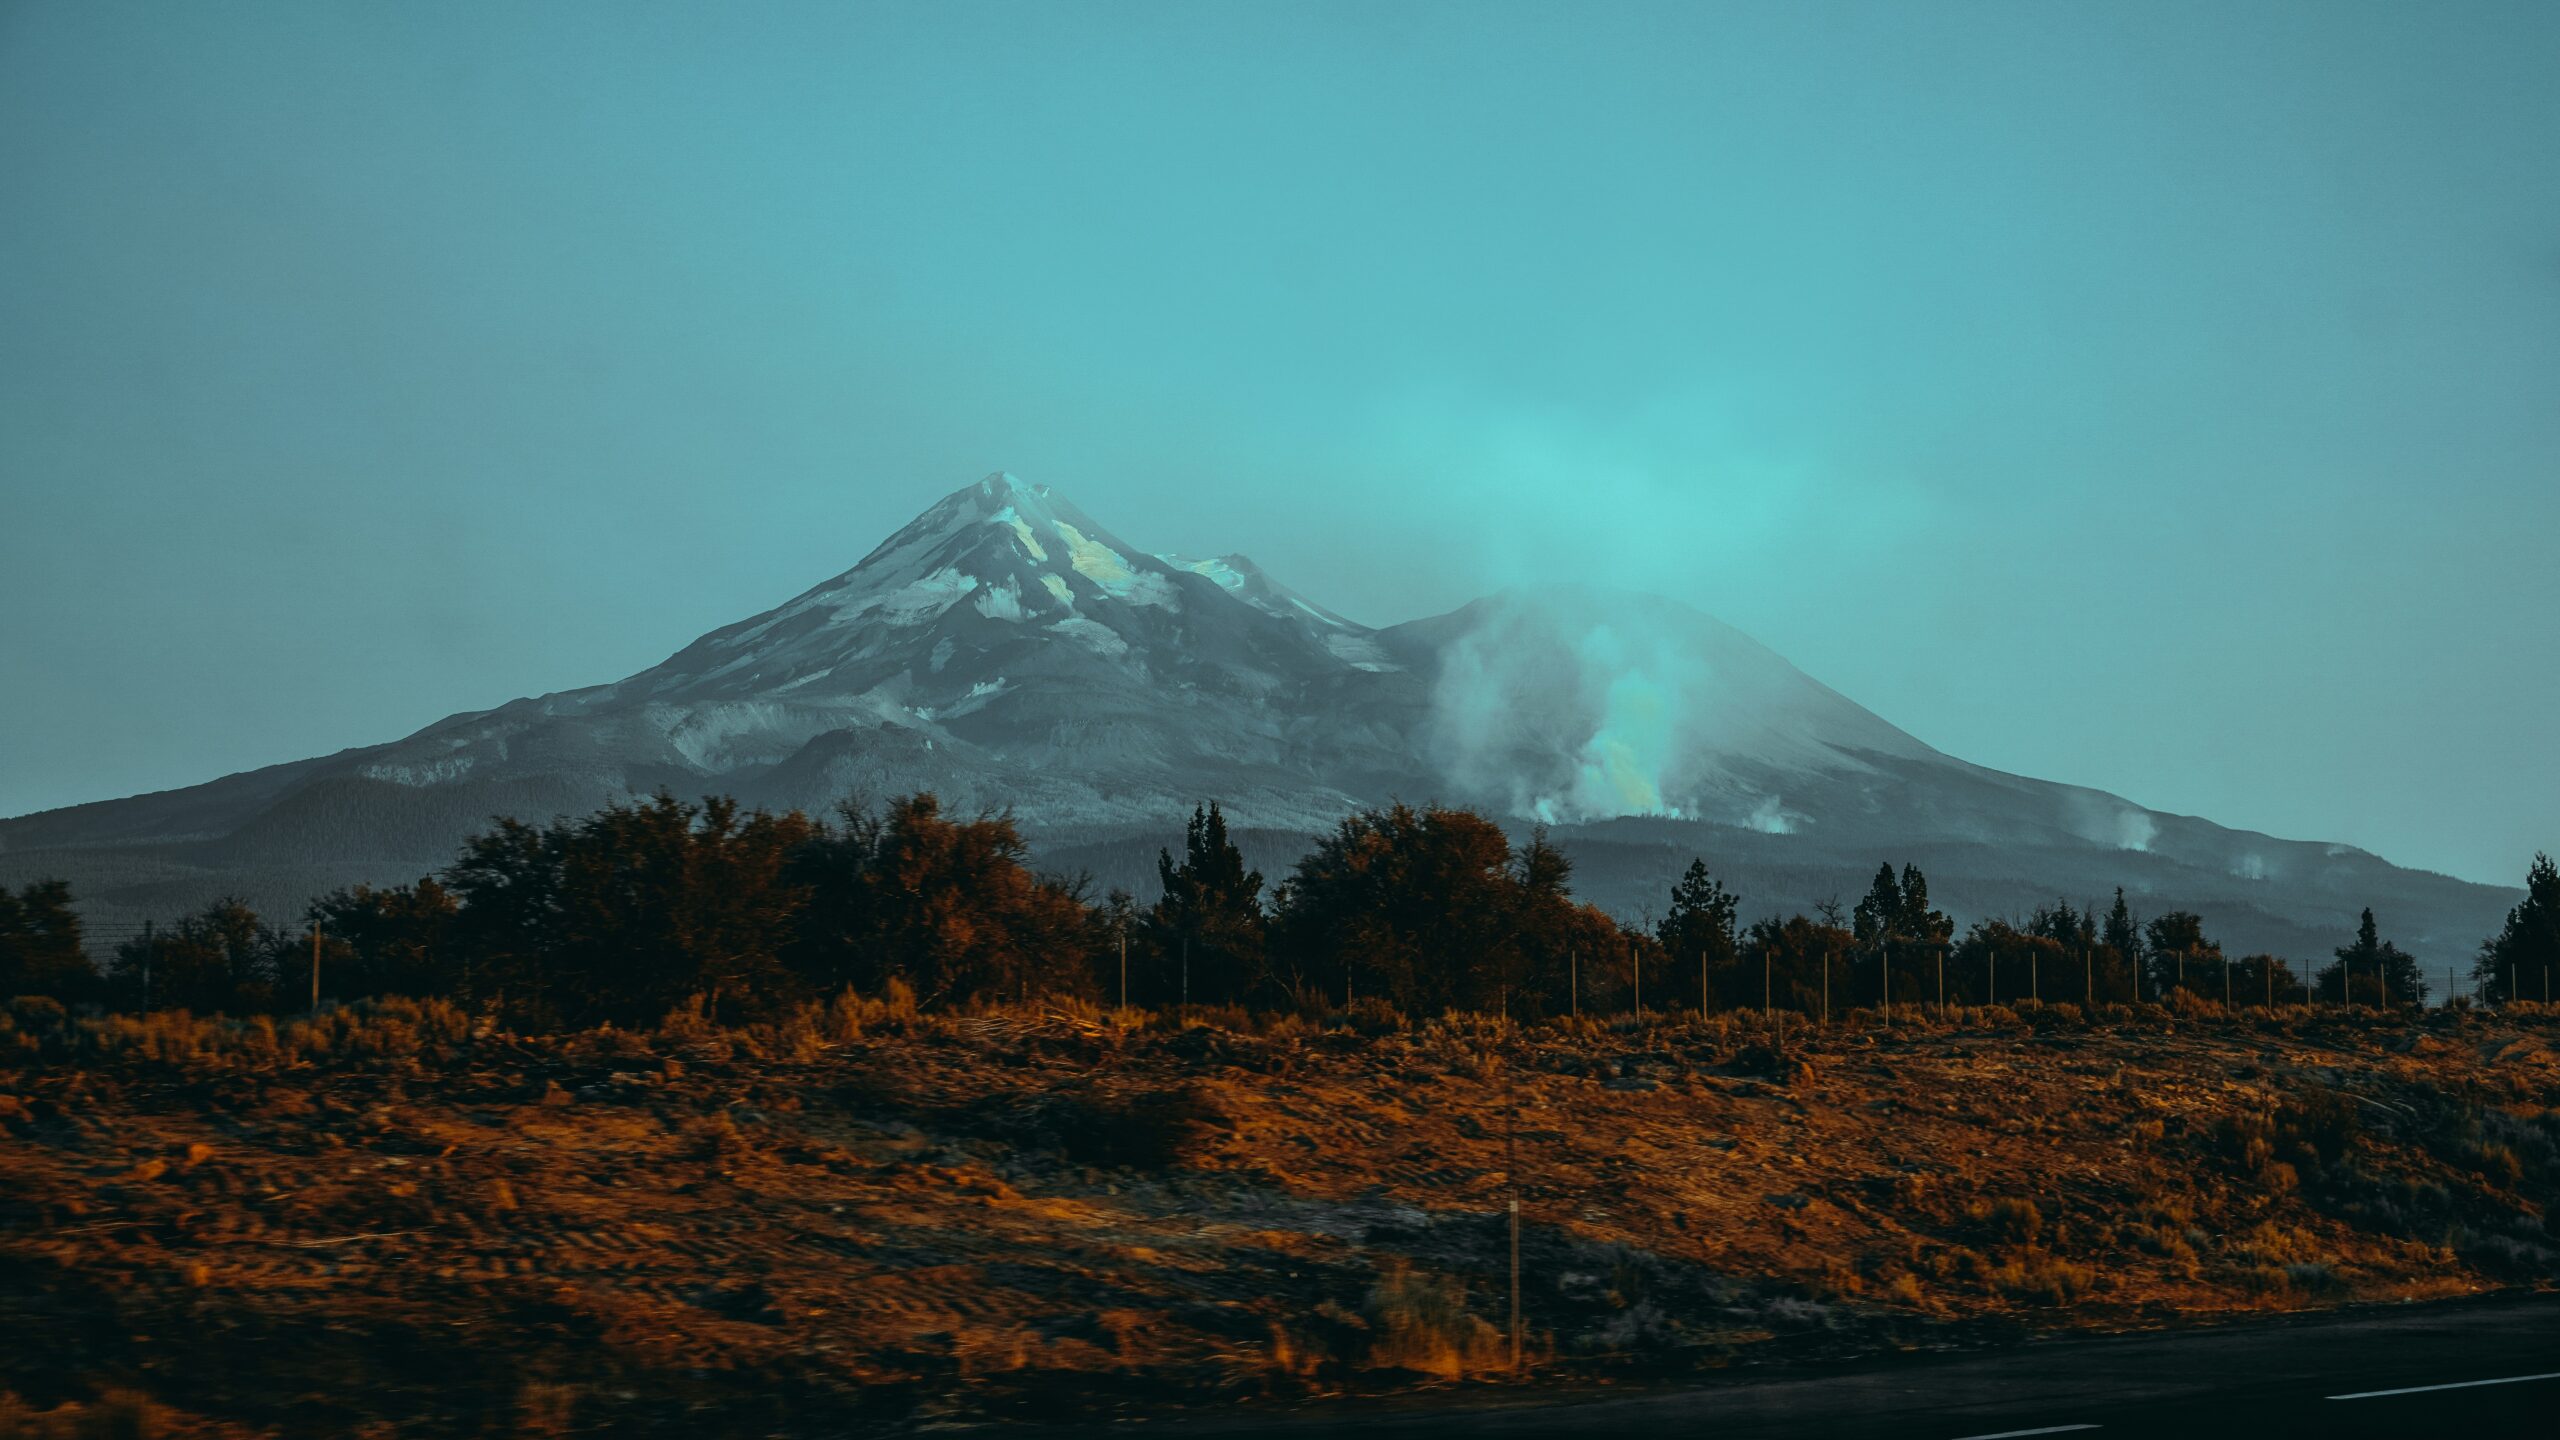 Are There Restrooms Or Facilities Available On Mount Shasta?